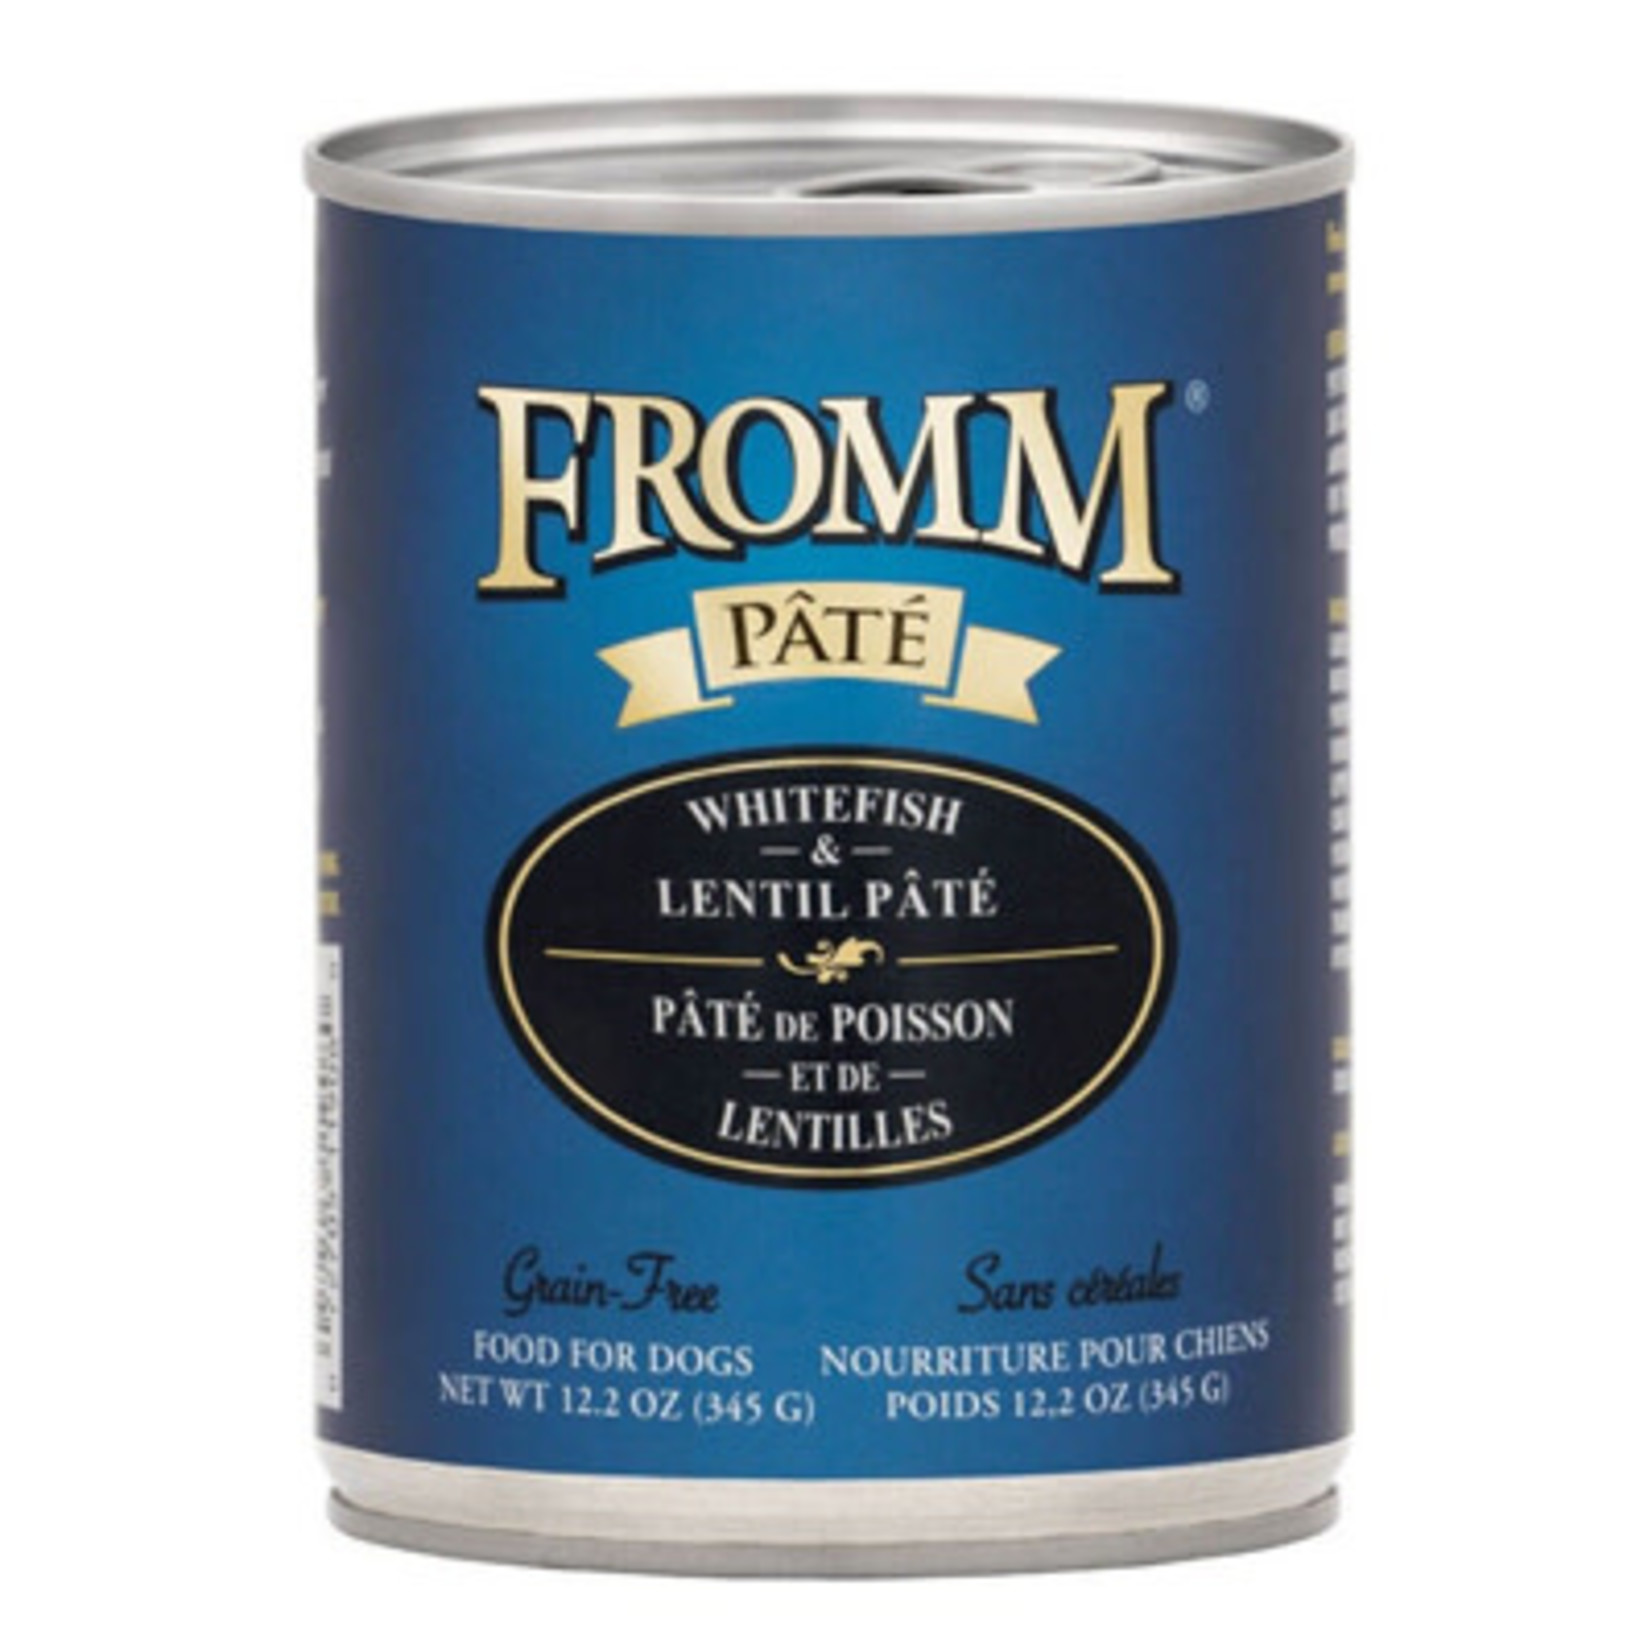 Fromm 12oz Grain Free Whitefish & Lentil Pate Dog Fromm